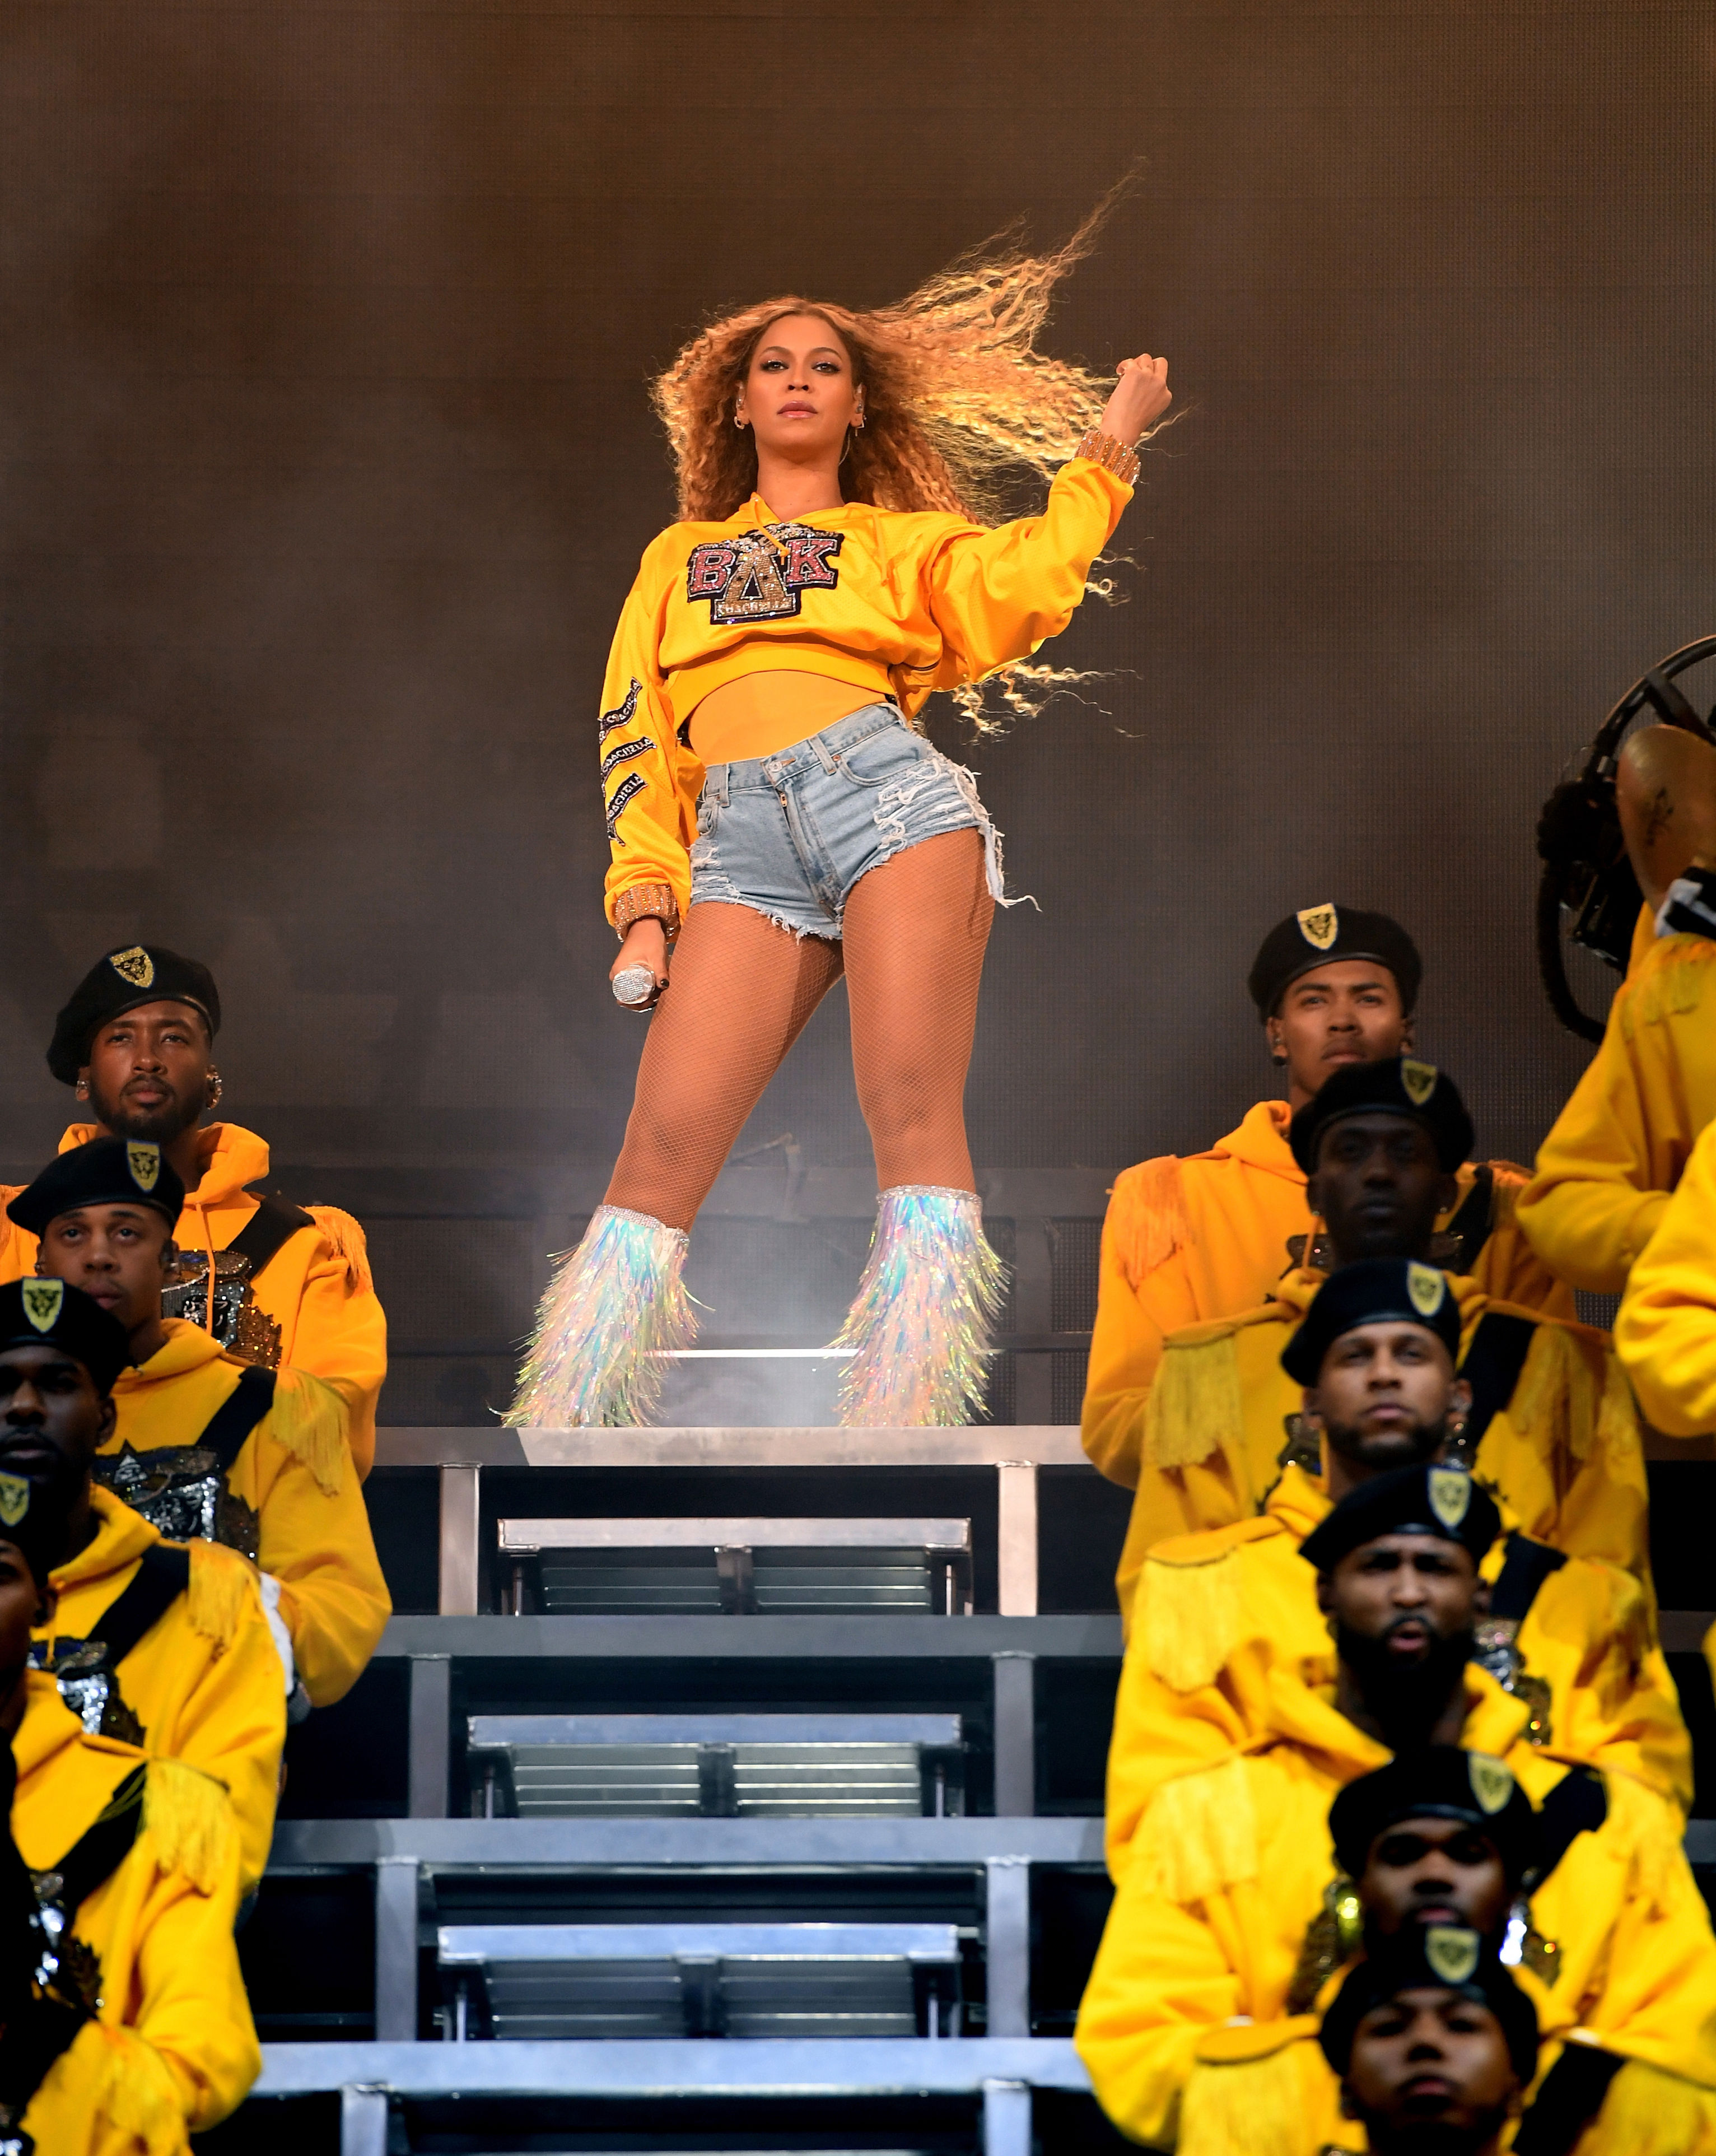 <p>In 2018, <a href="https://www.wonderwall.com/celebrity/profiles/overview/beyonce-243.article">Beyonce</a> became the first Black woman to <a href="https://www.wonderwall.com/style/fashion/see-all-beyonce-coachella-2018-looks-both-performances-outfits-stage-balmain-3013880.gallery">headline the Coachella Valley Music and Arts Festival</a>, which is held annually in Indio, California. The superstar's set also set a record as <a href="https://www.wonderwall.com/news/beyonces-coachella-performance-was-most-streamed-youtube-history-3013802.article">the most streamed Beychella, er, Coachella set</a> since YouTube began streaming the festival eight years earlier.</p>